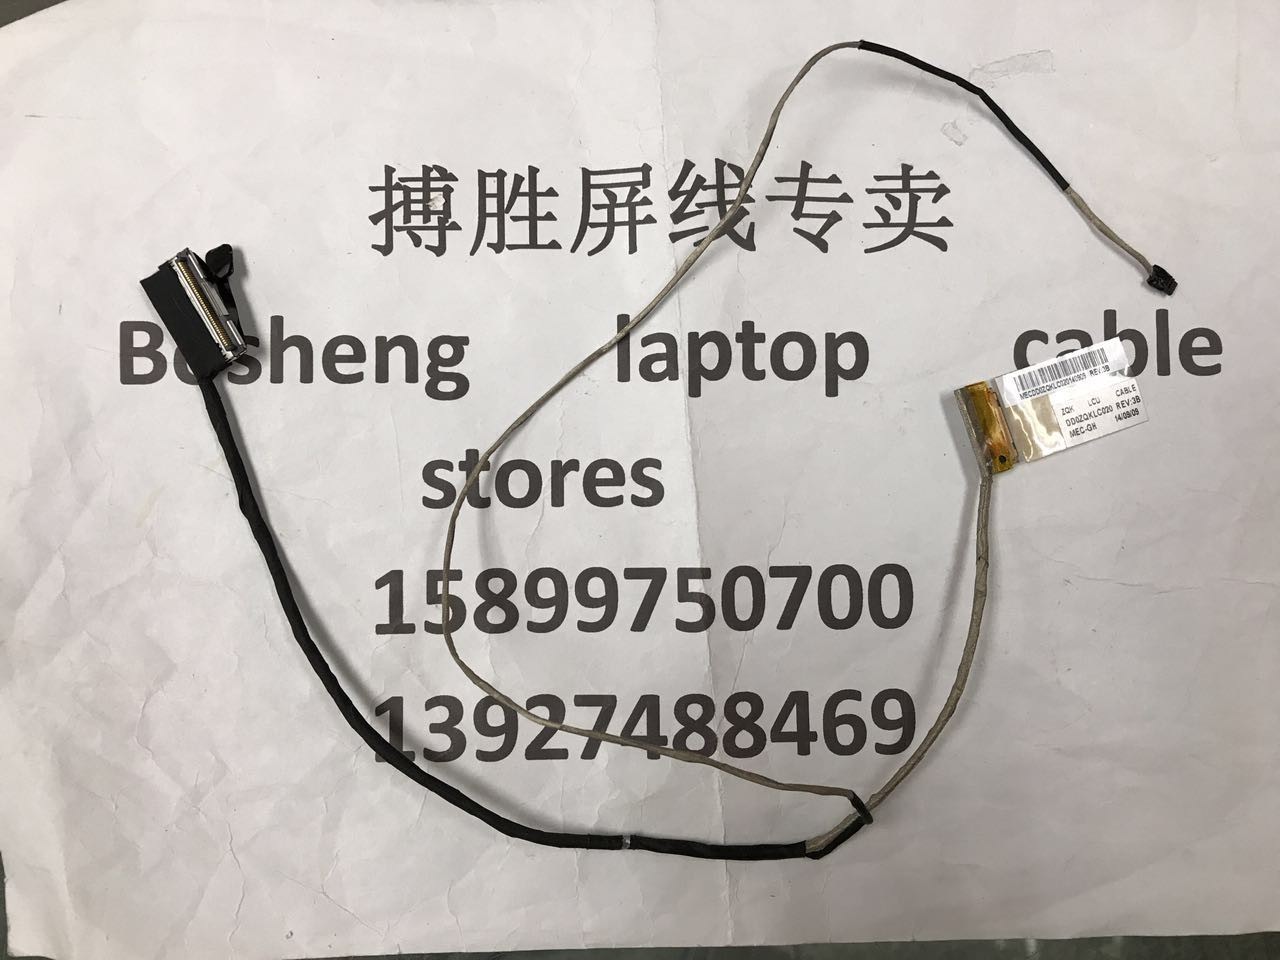 Acer V5-472 V5-472G 472PG V5-542G V5-473G V7-481P DD0ZQKLC020 DD0ZQKLC010 LED LCD LVDS Cable